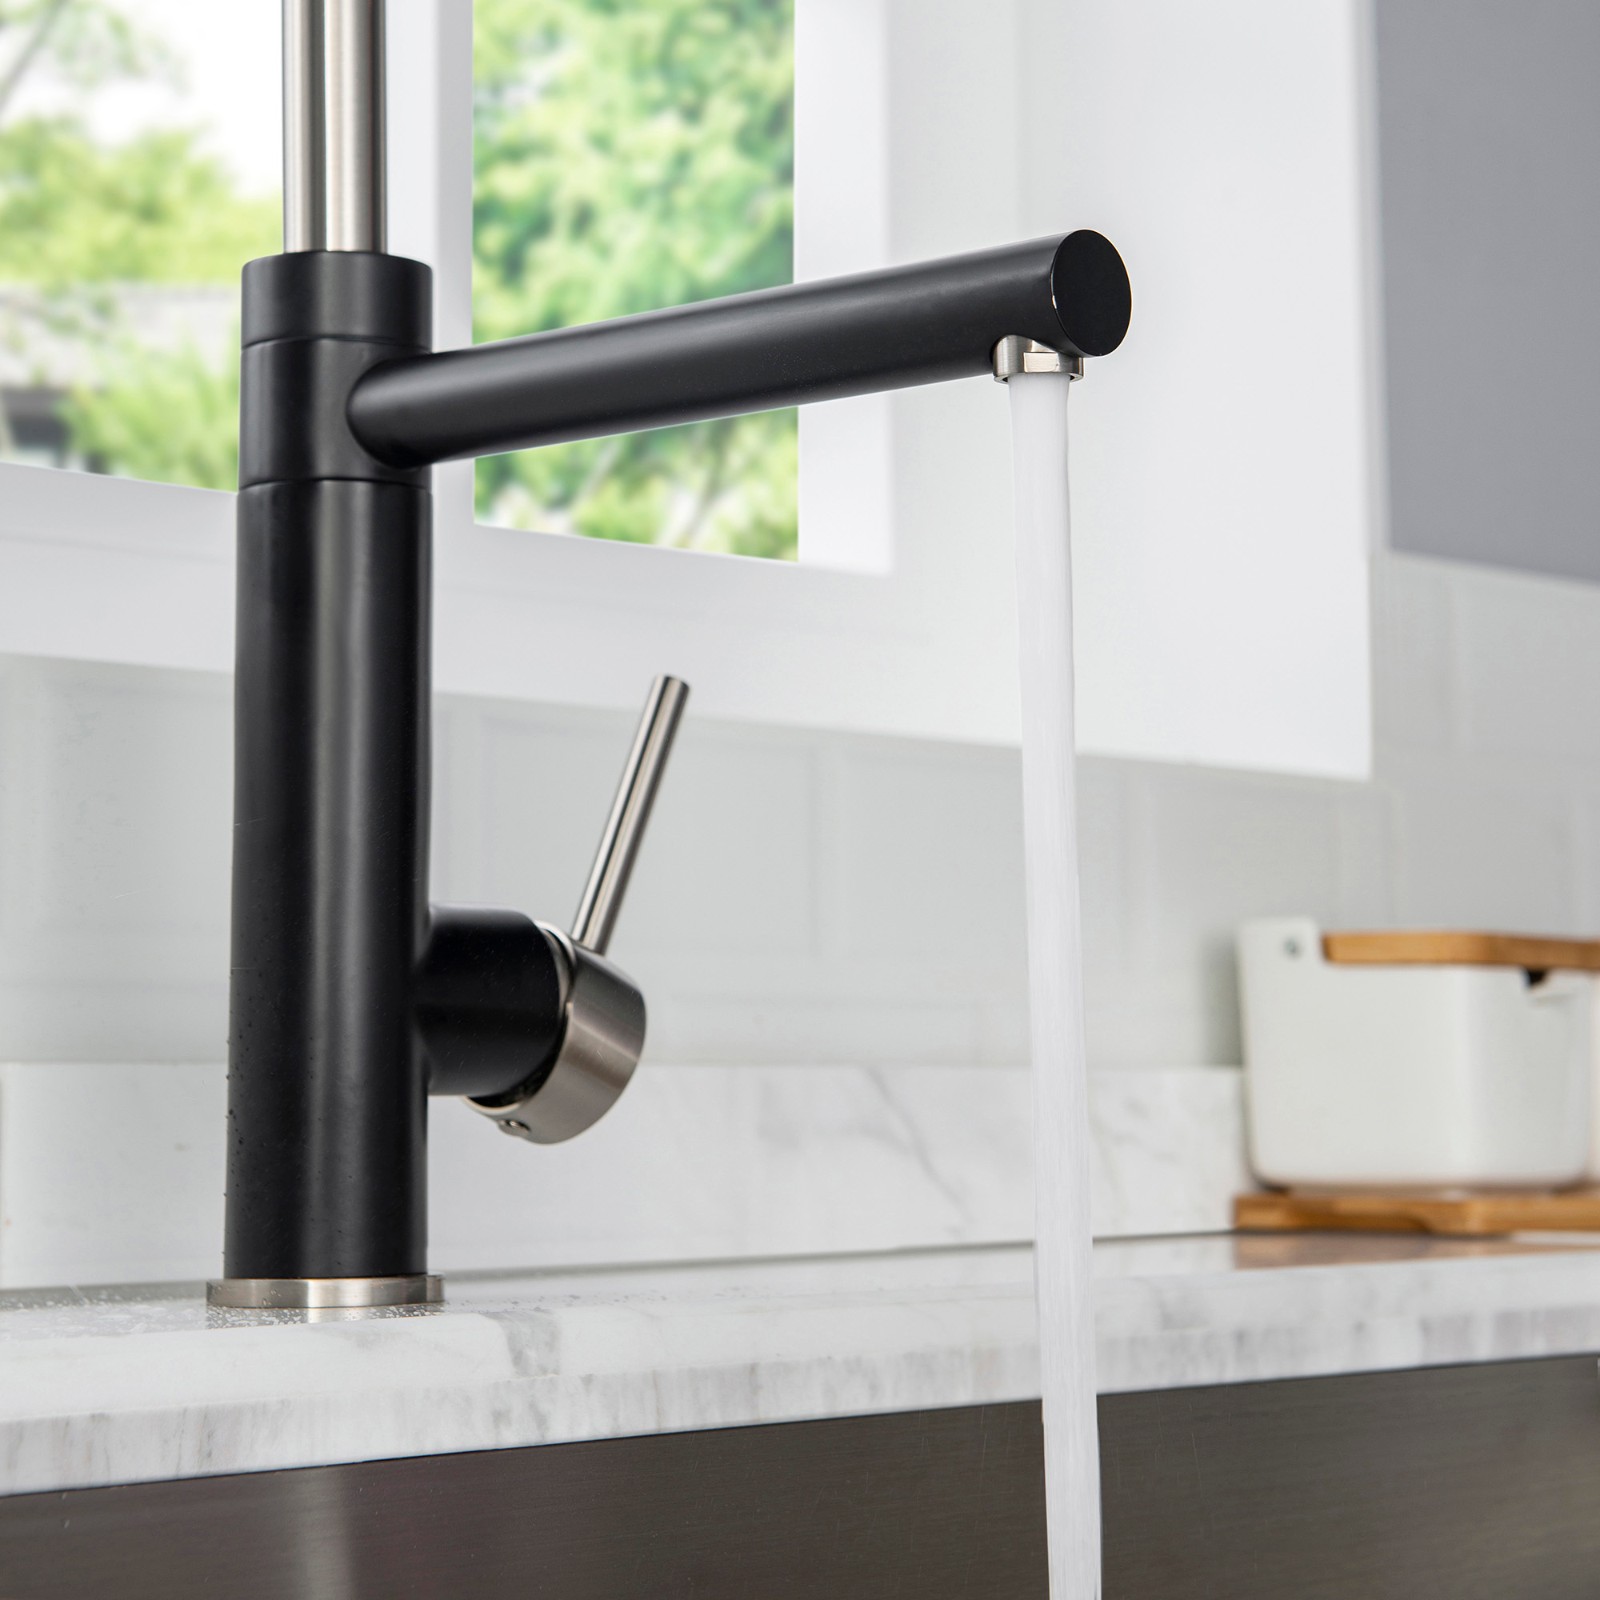  WOODBRIDGE WK060501BL Stainless Steel Single Handle Pre-Rinse Pull Down Kitchen Faucet and Pot Filler in Matte Black Finish._5039